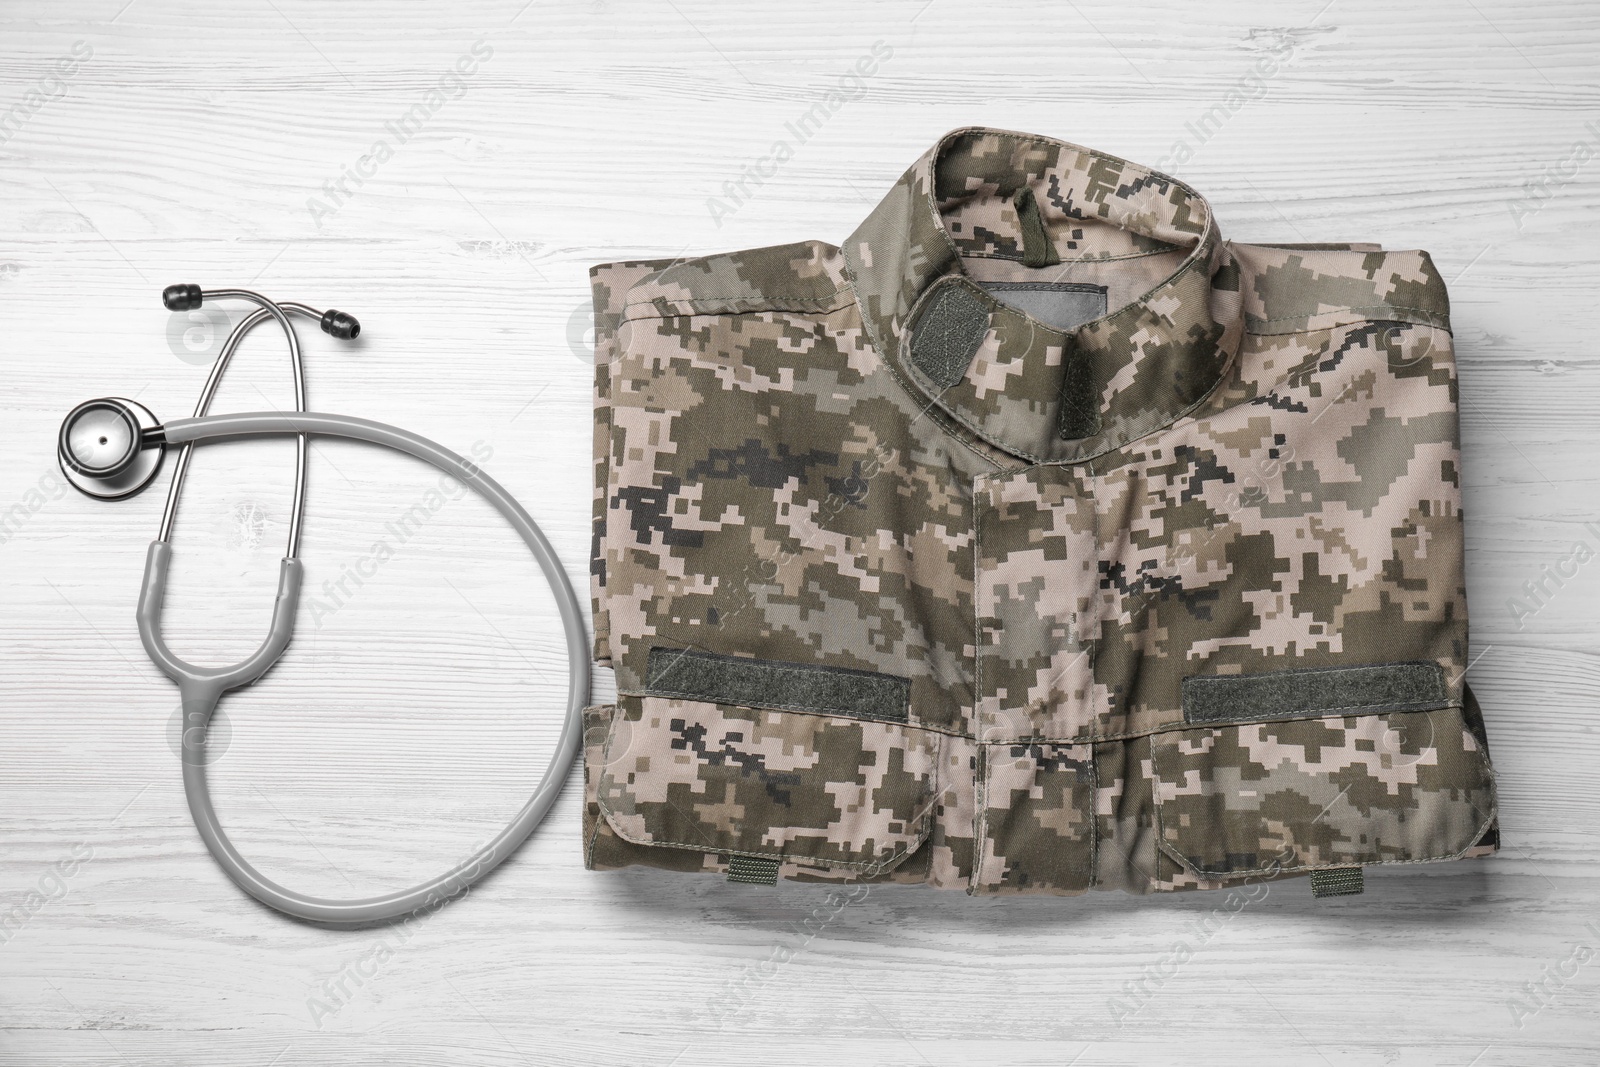 Photo of Stethoscope and military uniform on white wooden background, flat lay